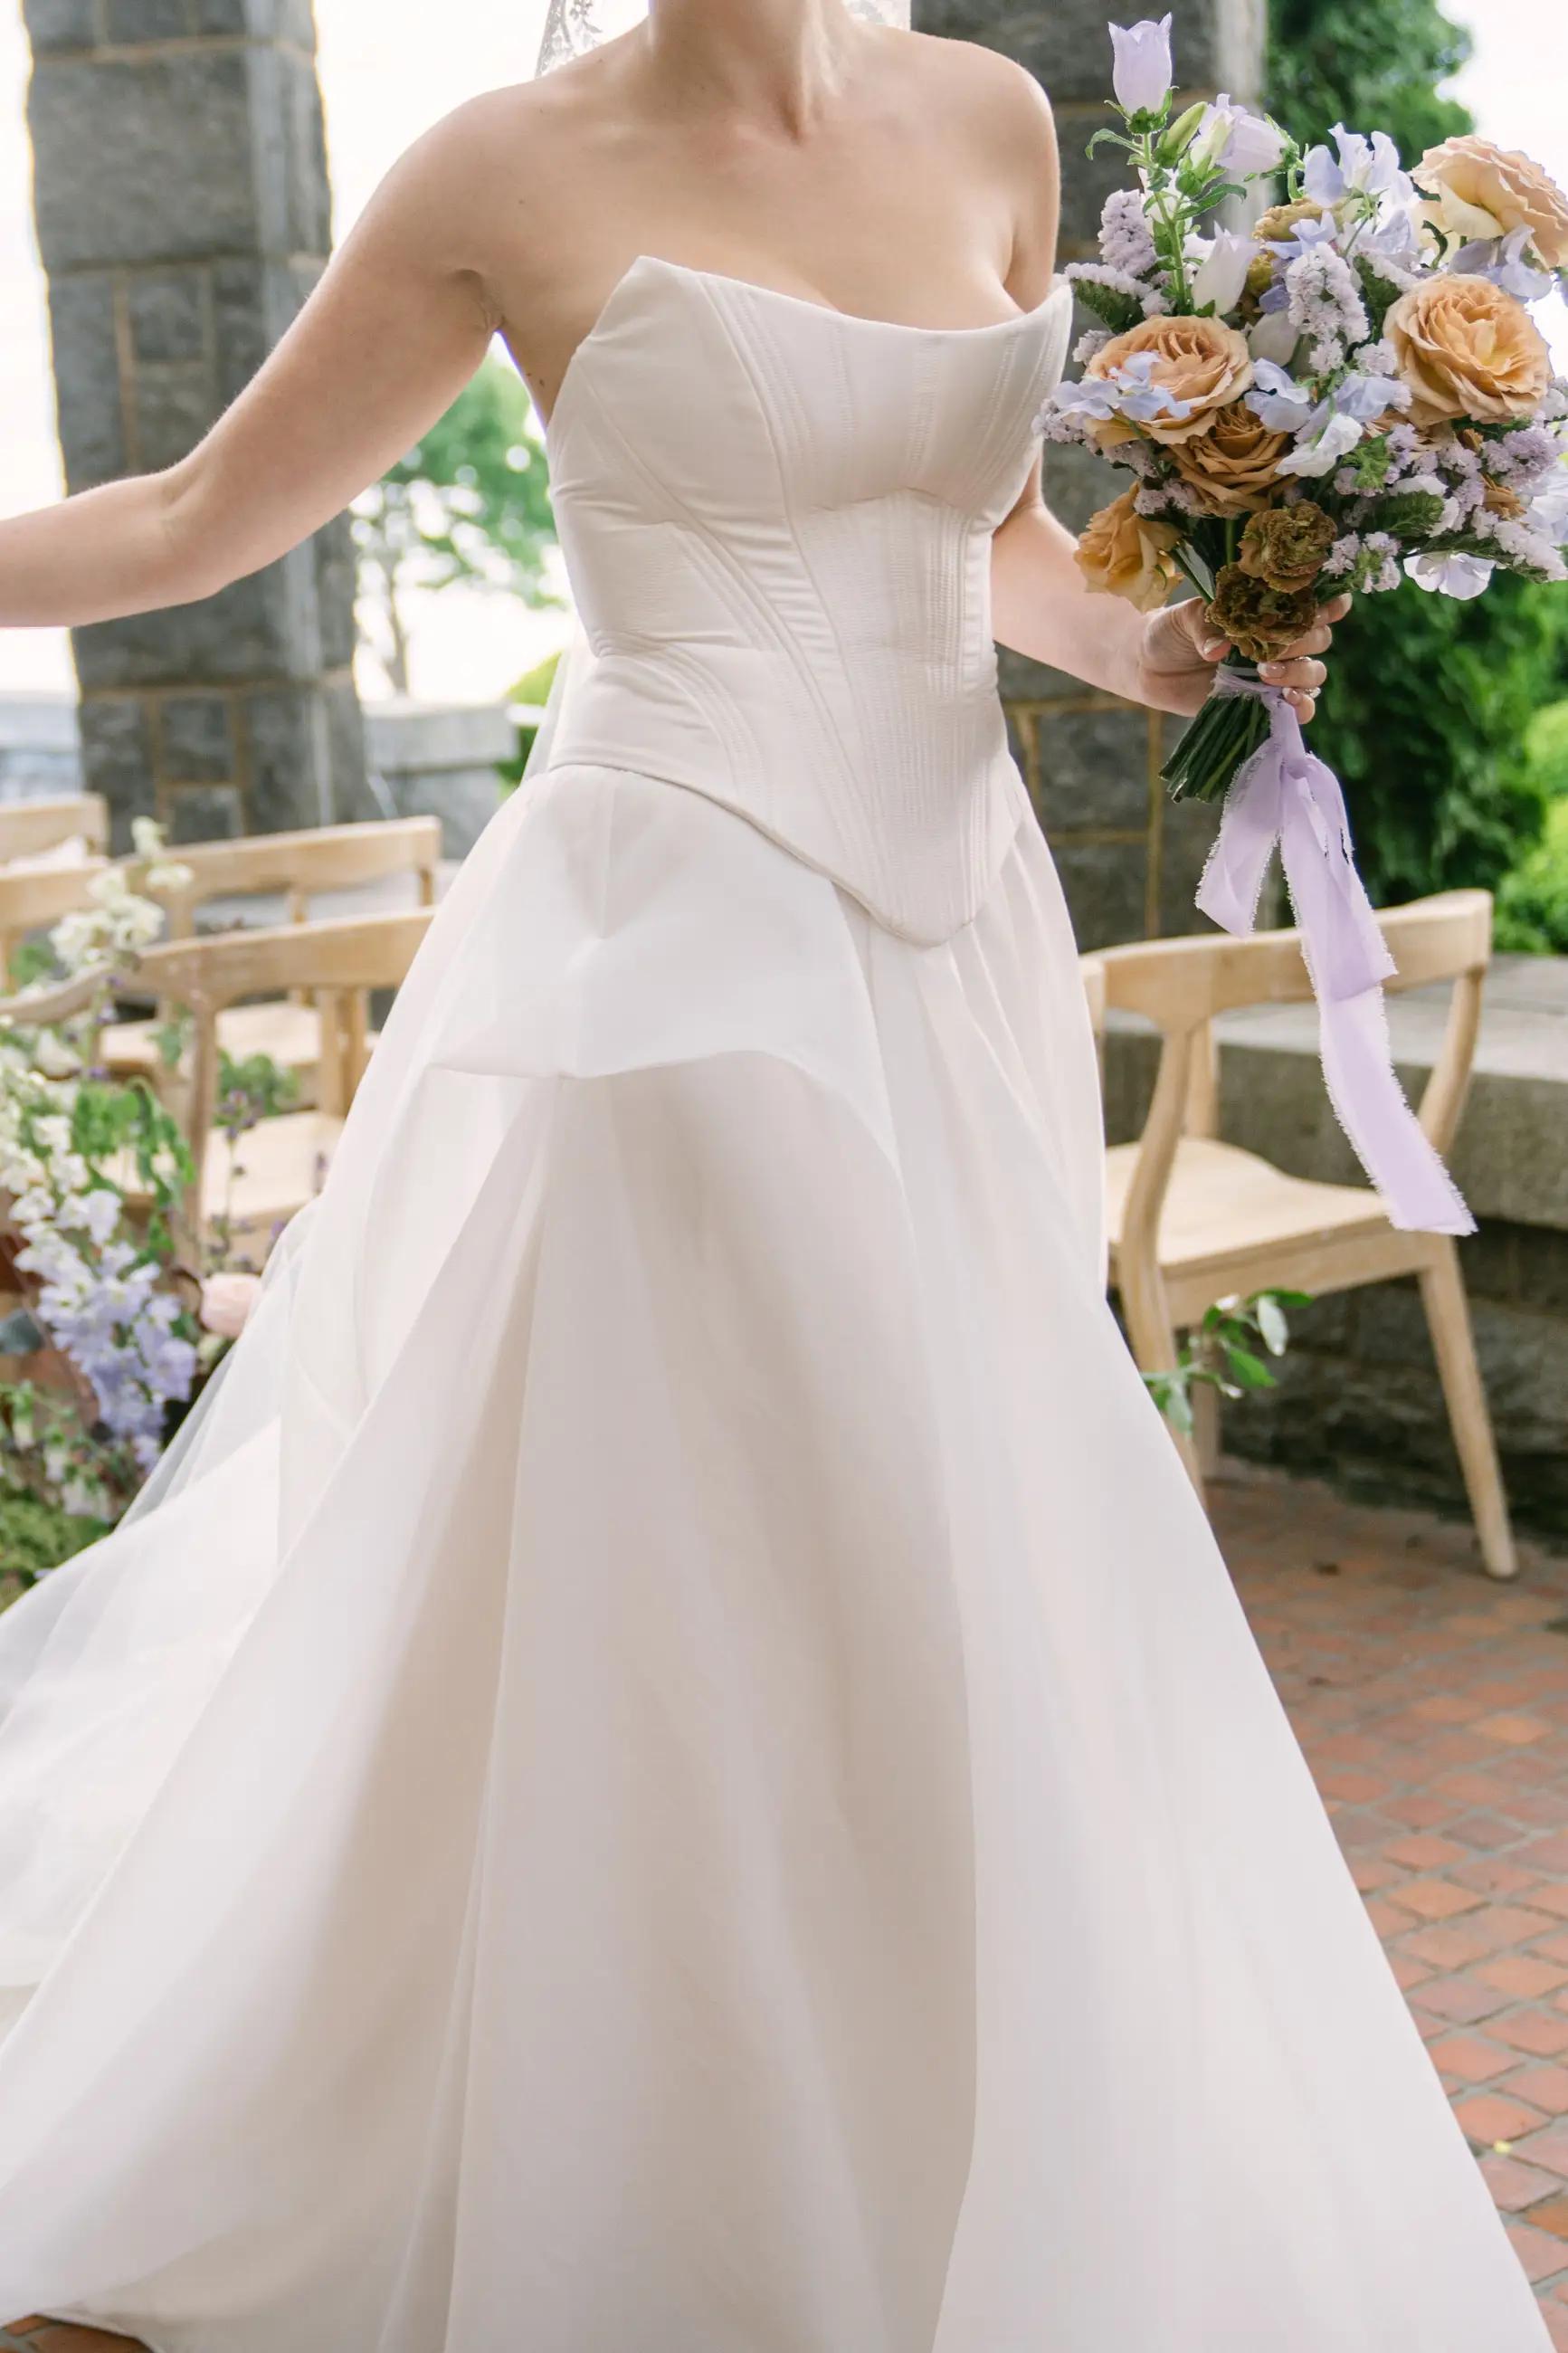 Waterfront Elegance: A Saint Bridal Gown at Branford House. Mobile Image